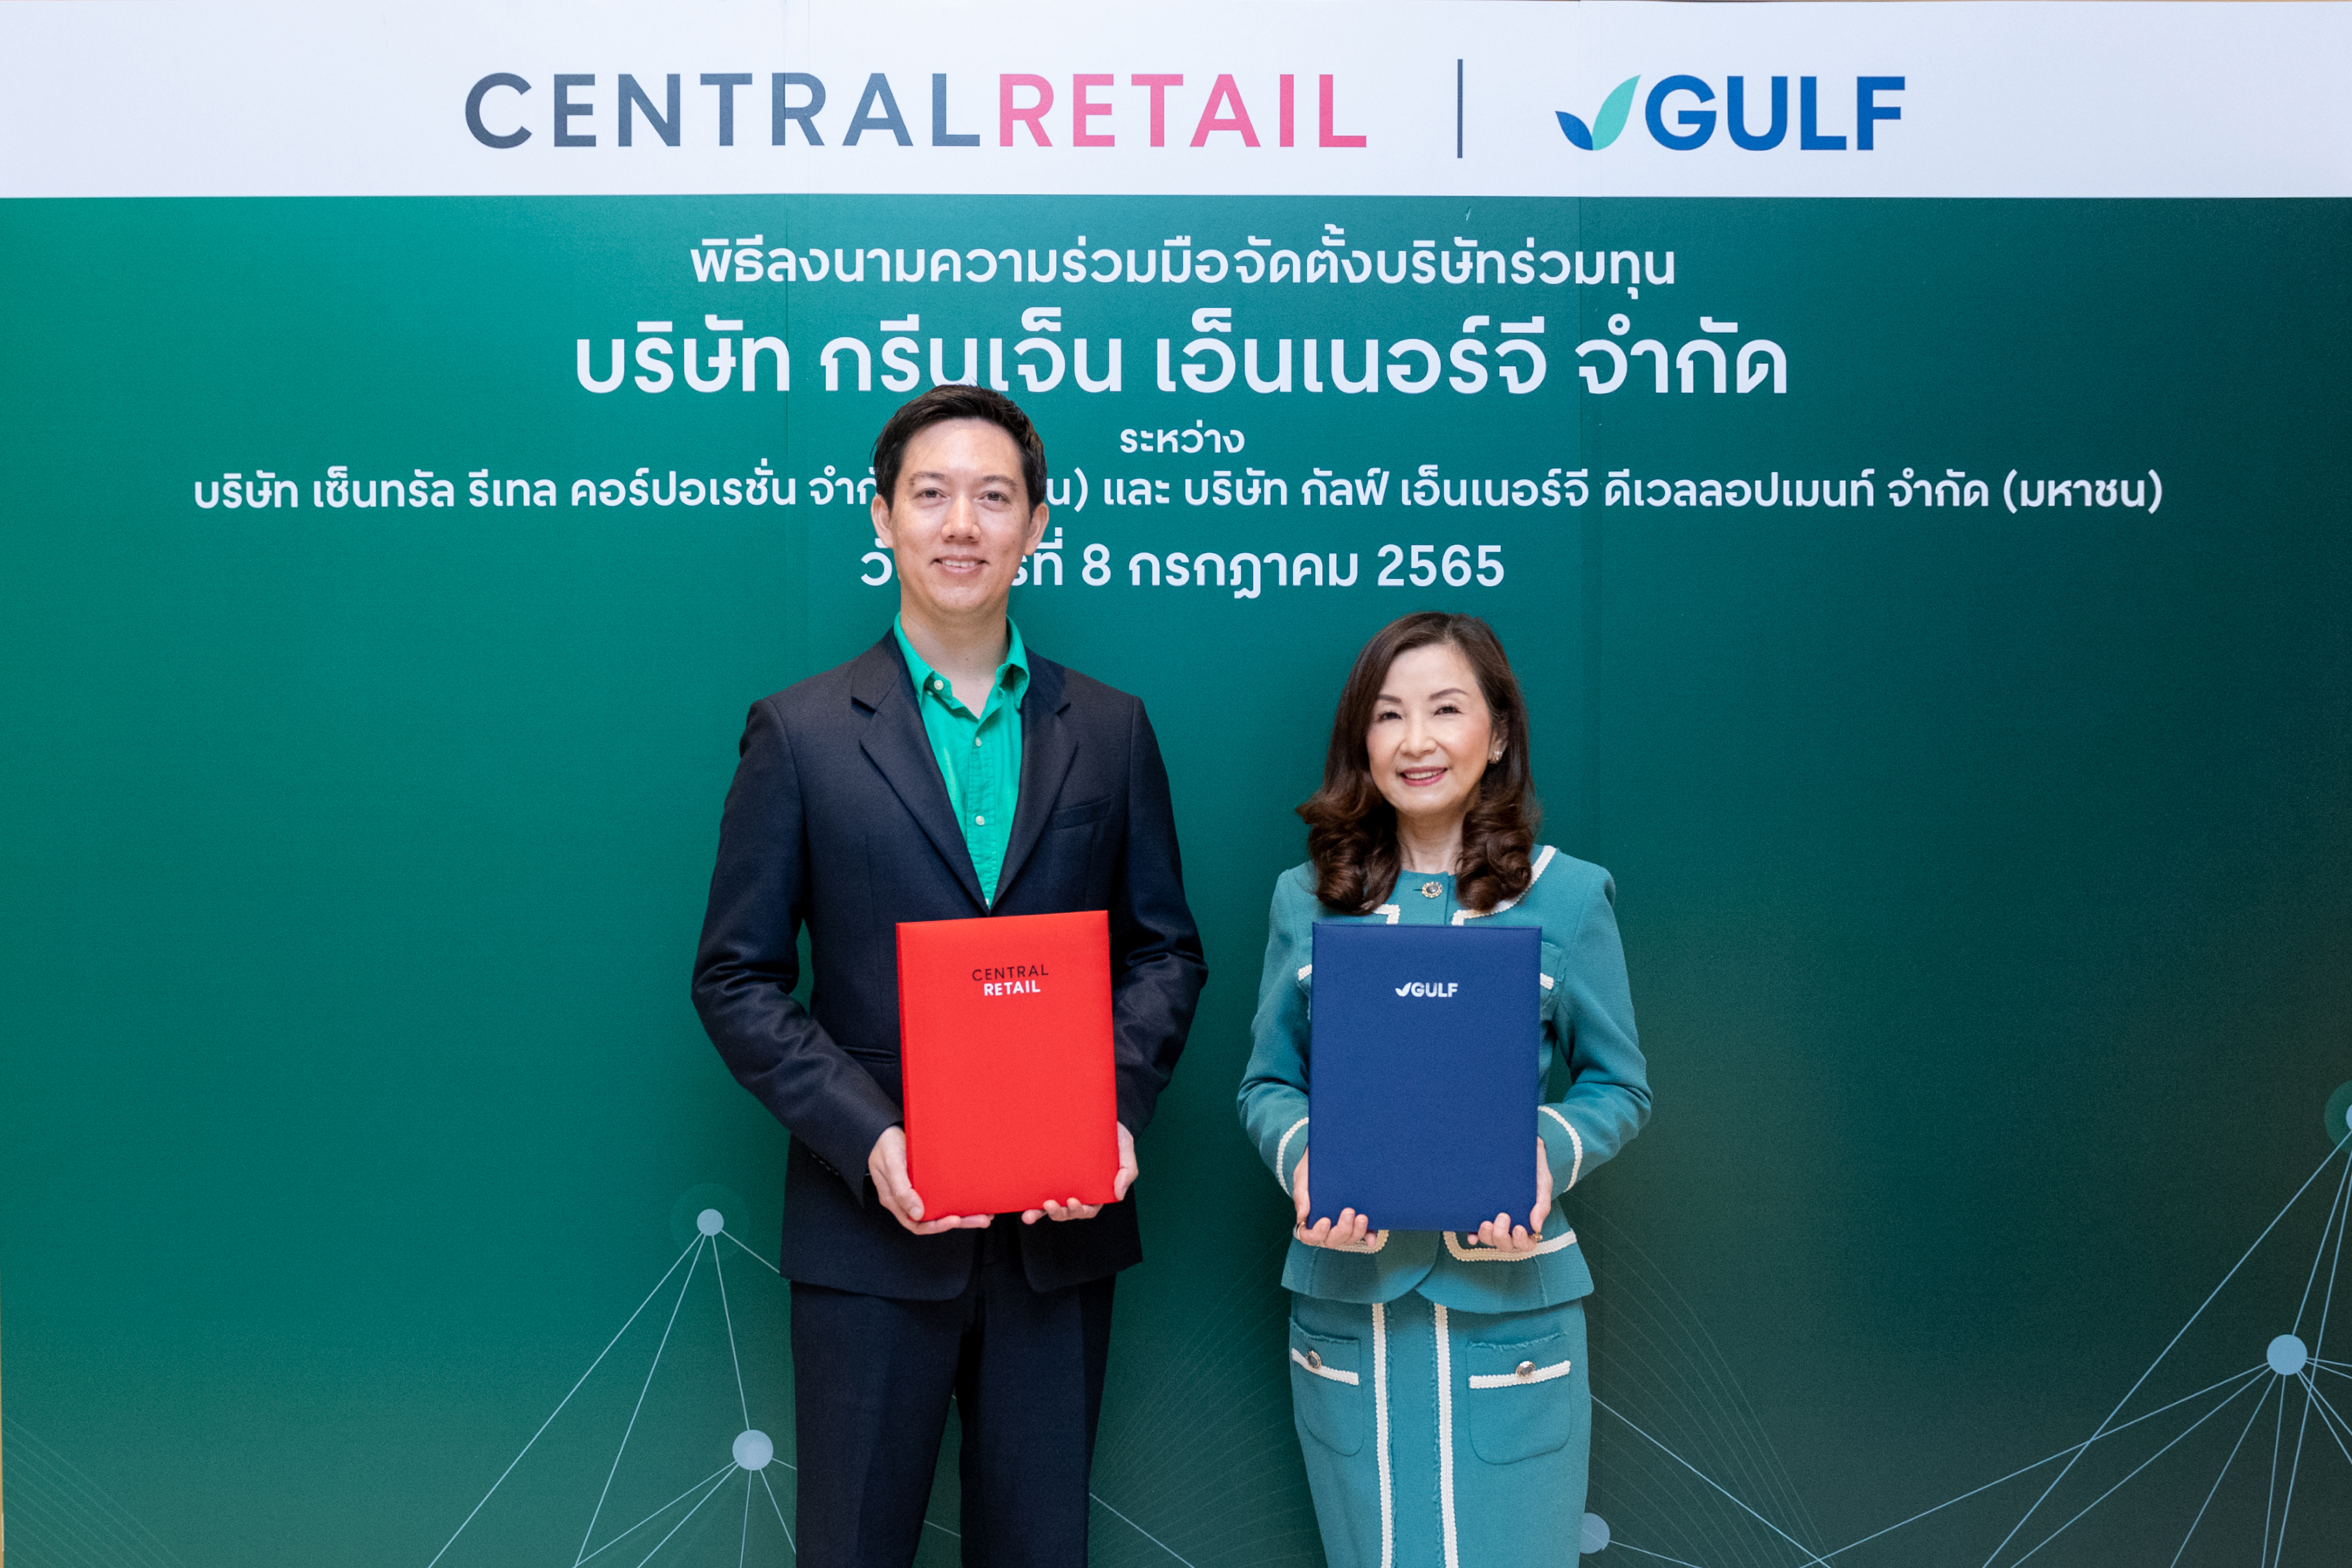 GULF joins forces with Central Retail to spearhead solar energy production and retailing, setting targets as Thailand’s leader in renewable energy by 2026